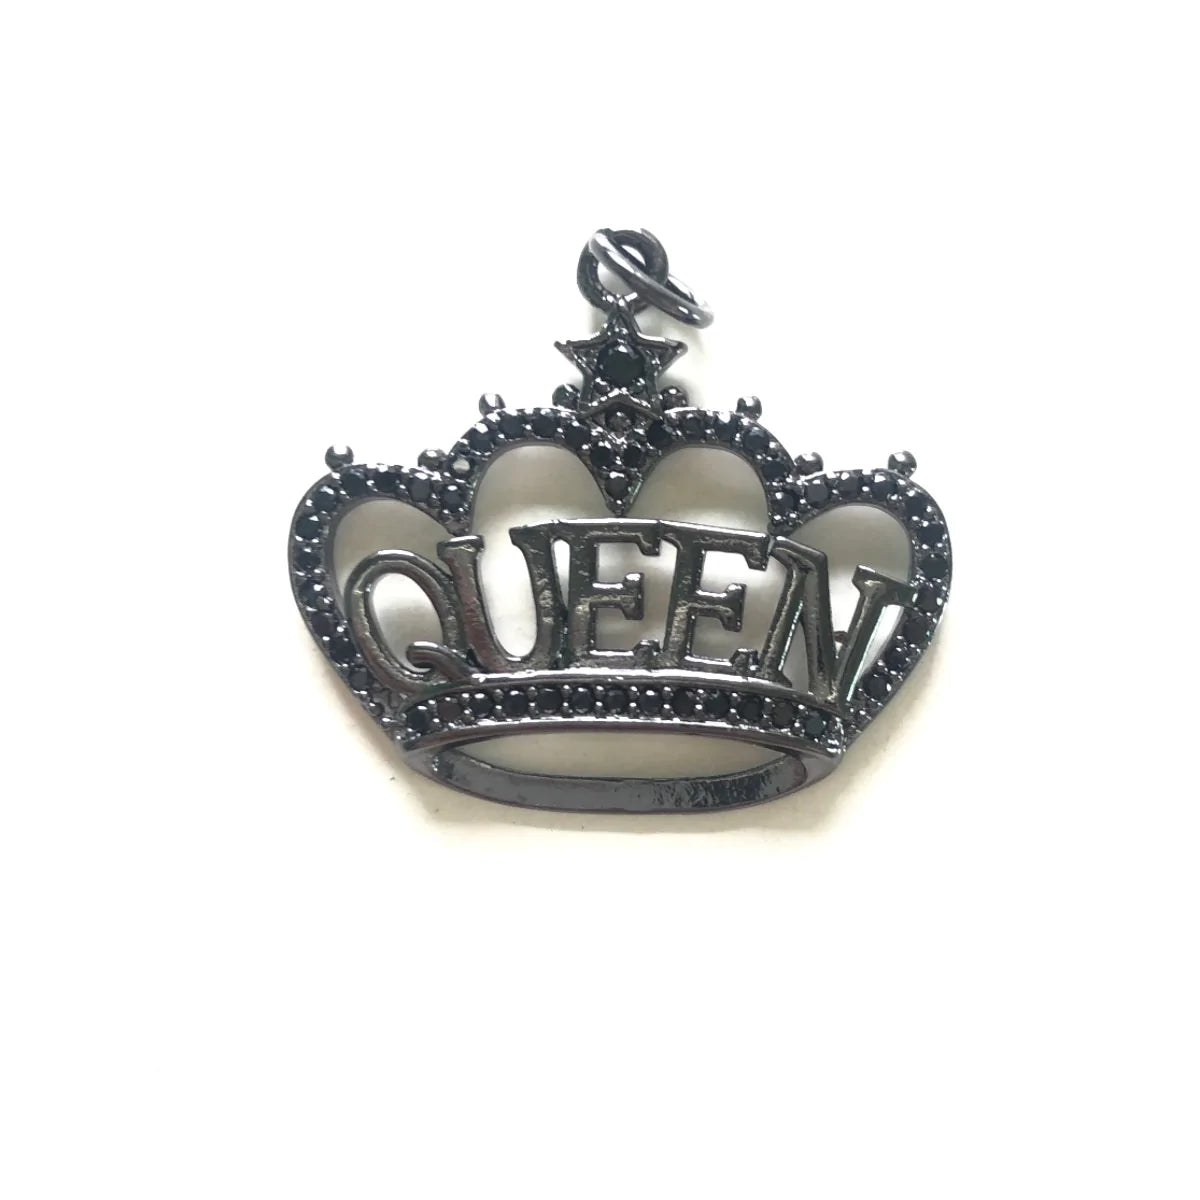 10pcs/lot 28*25mm CZ Paved Crown Queen Word Charms CZ Paved Charms Crowns New Charms Arrivals Queen Charms Charms Beads Beyond